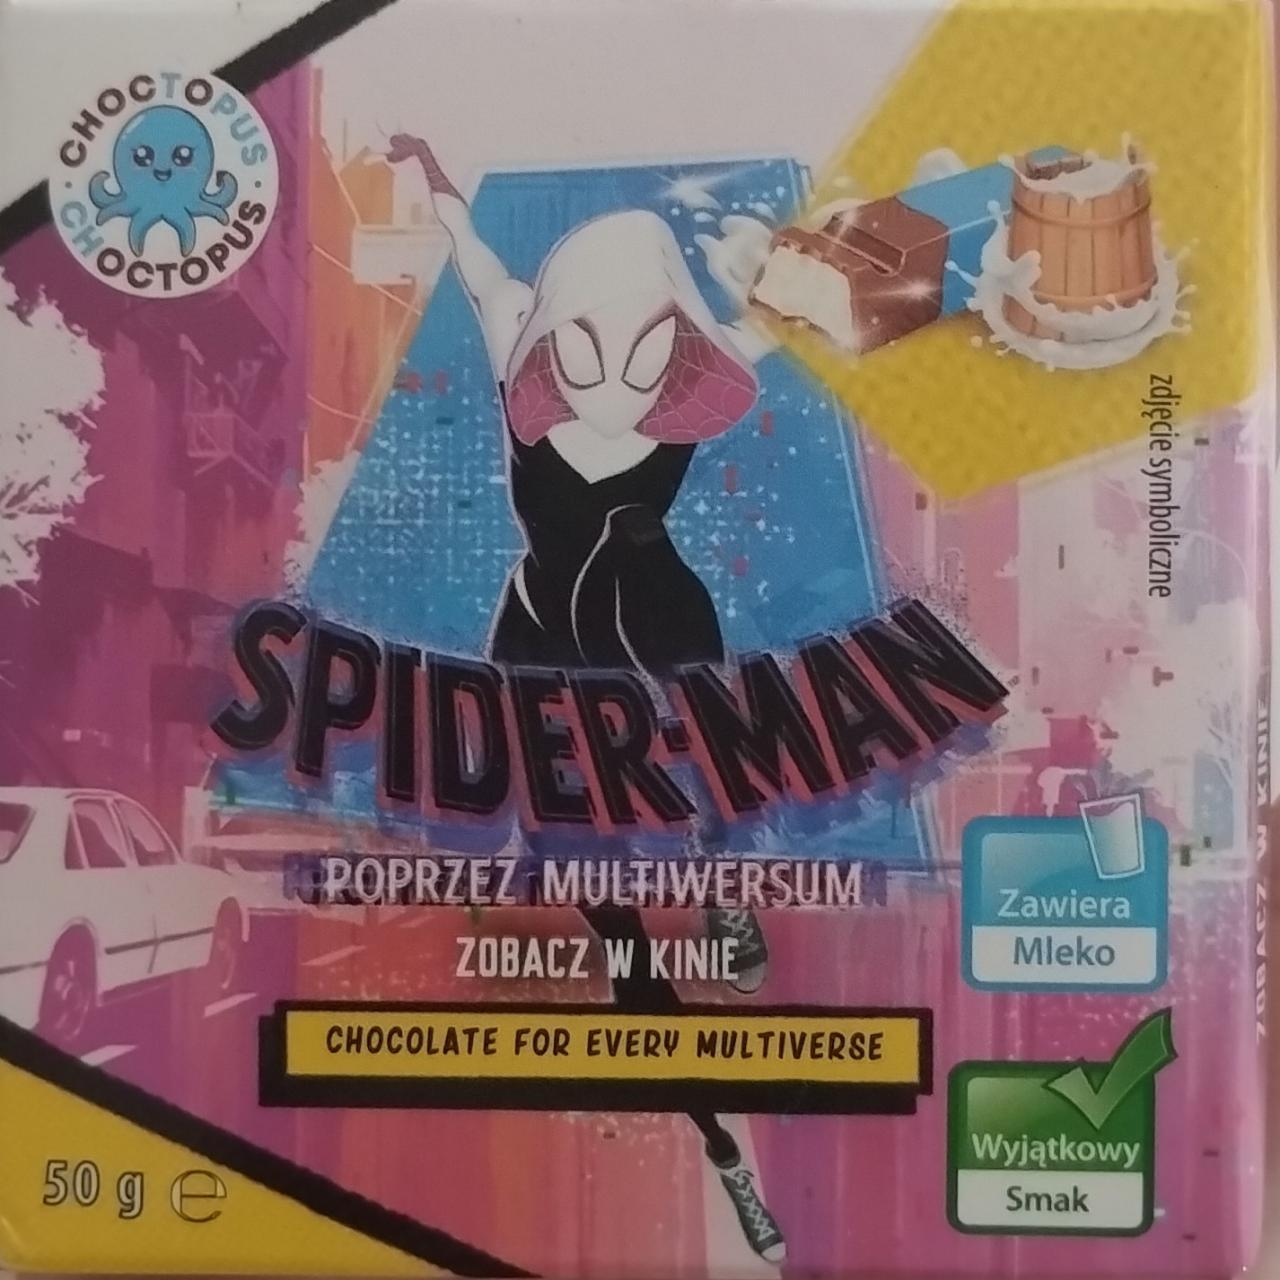 Zdjęcia - Spider-Man Chocolate for every multiverse Choctopus